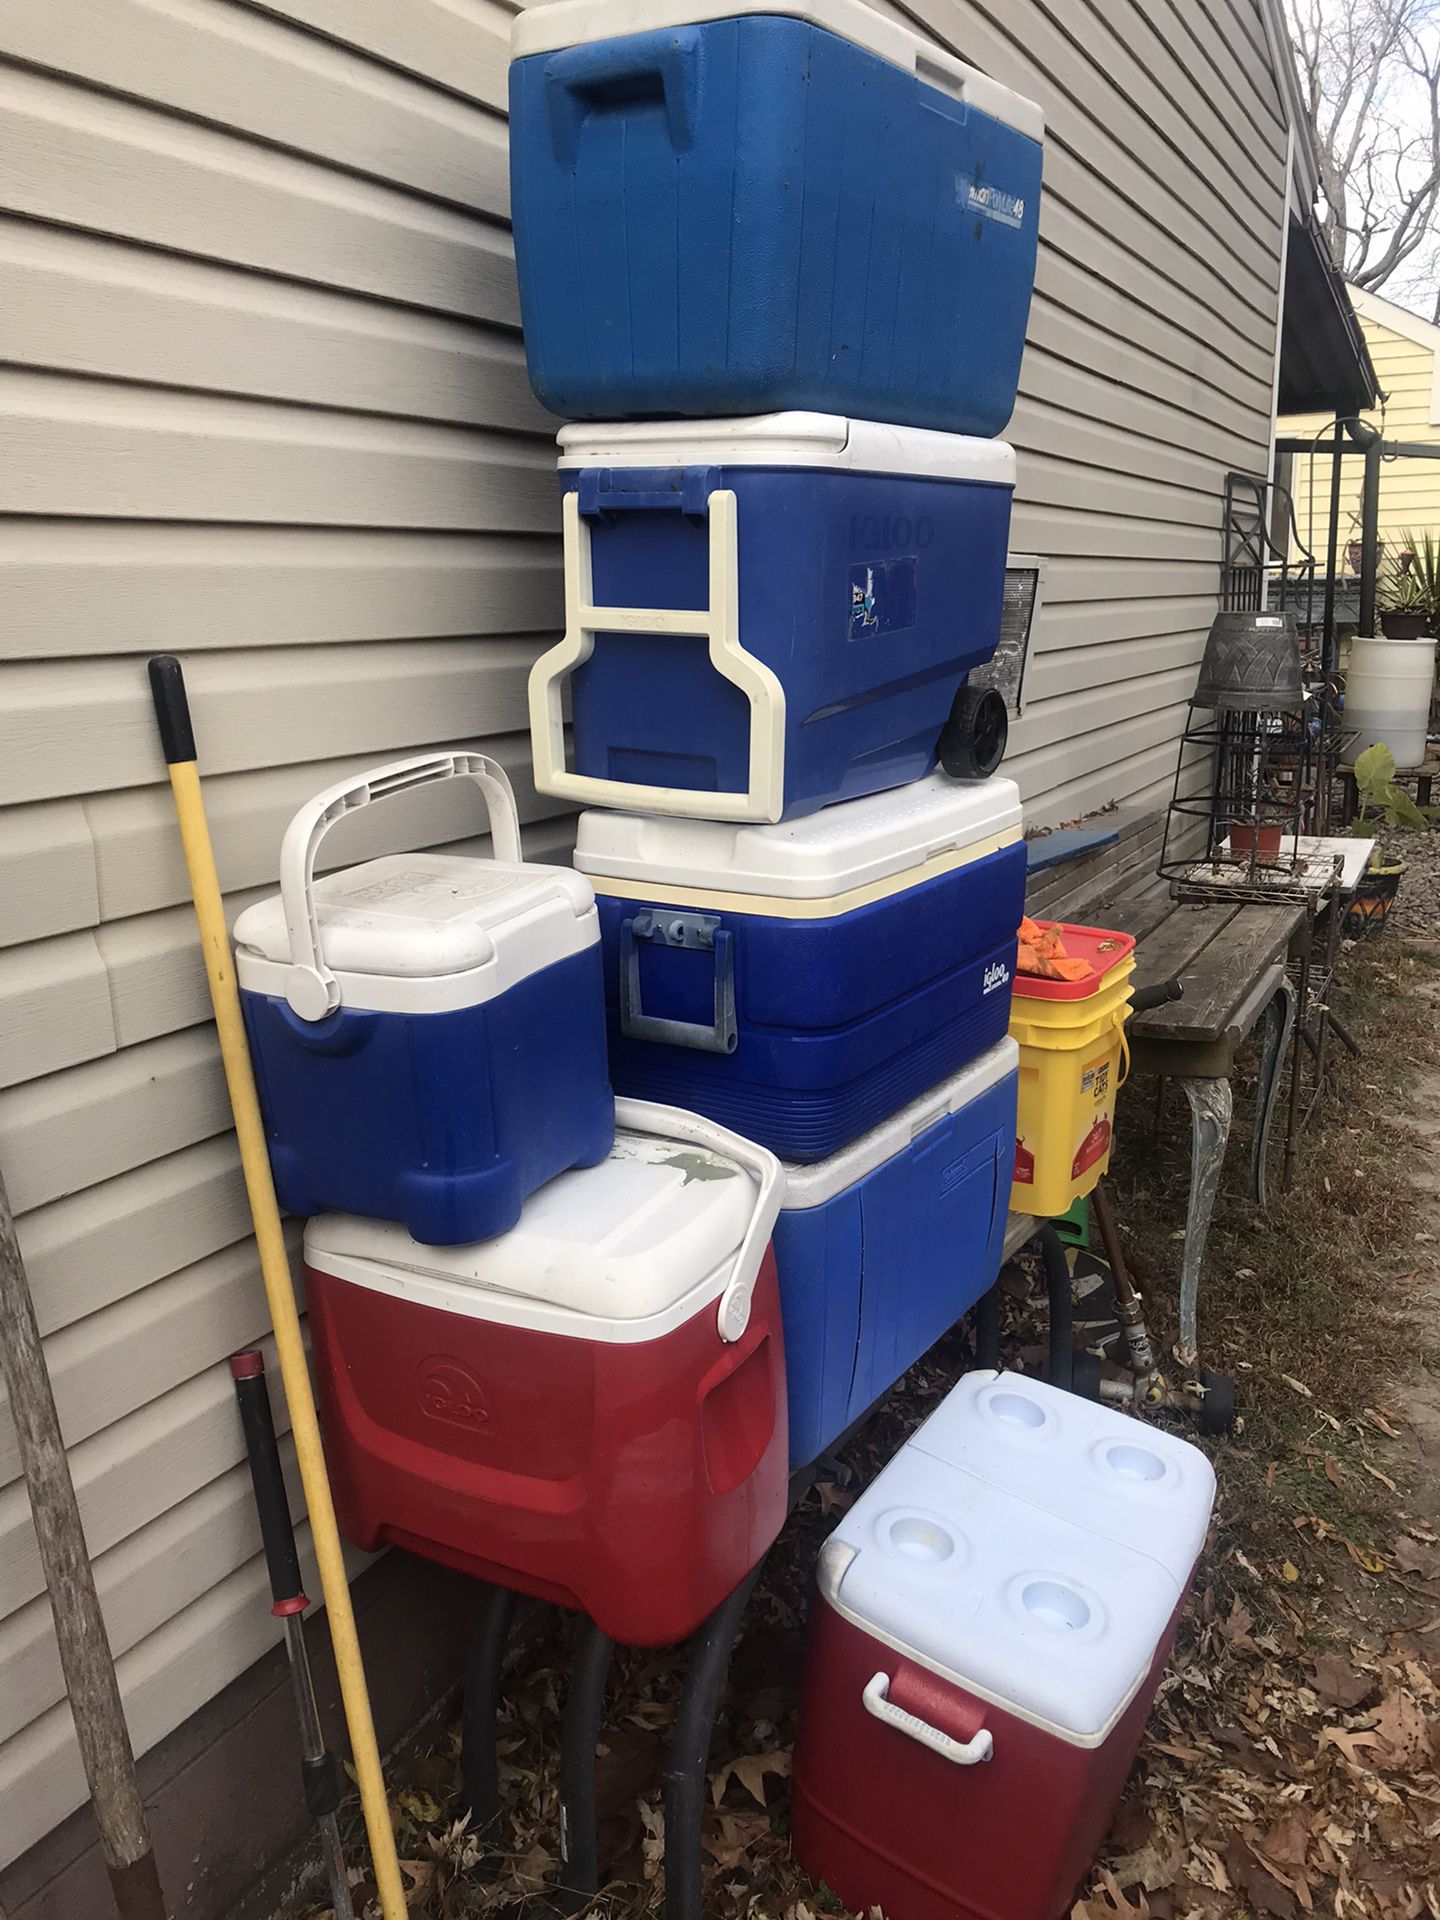 7 Coolers All For 25 bucks 